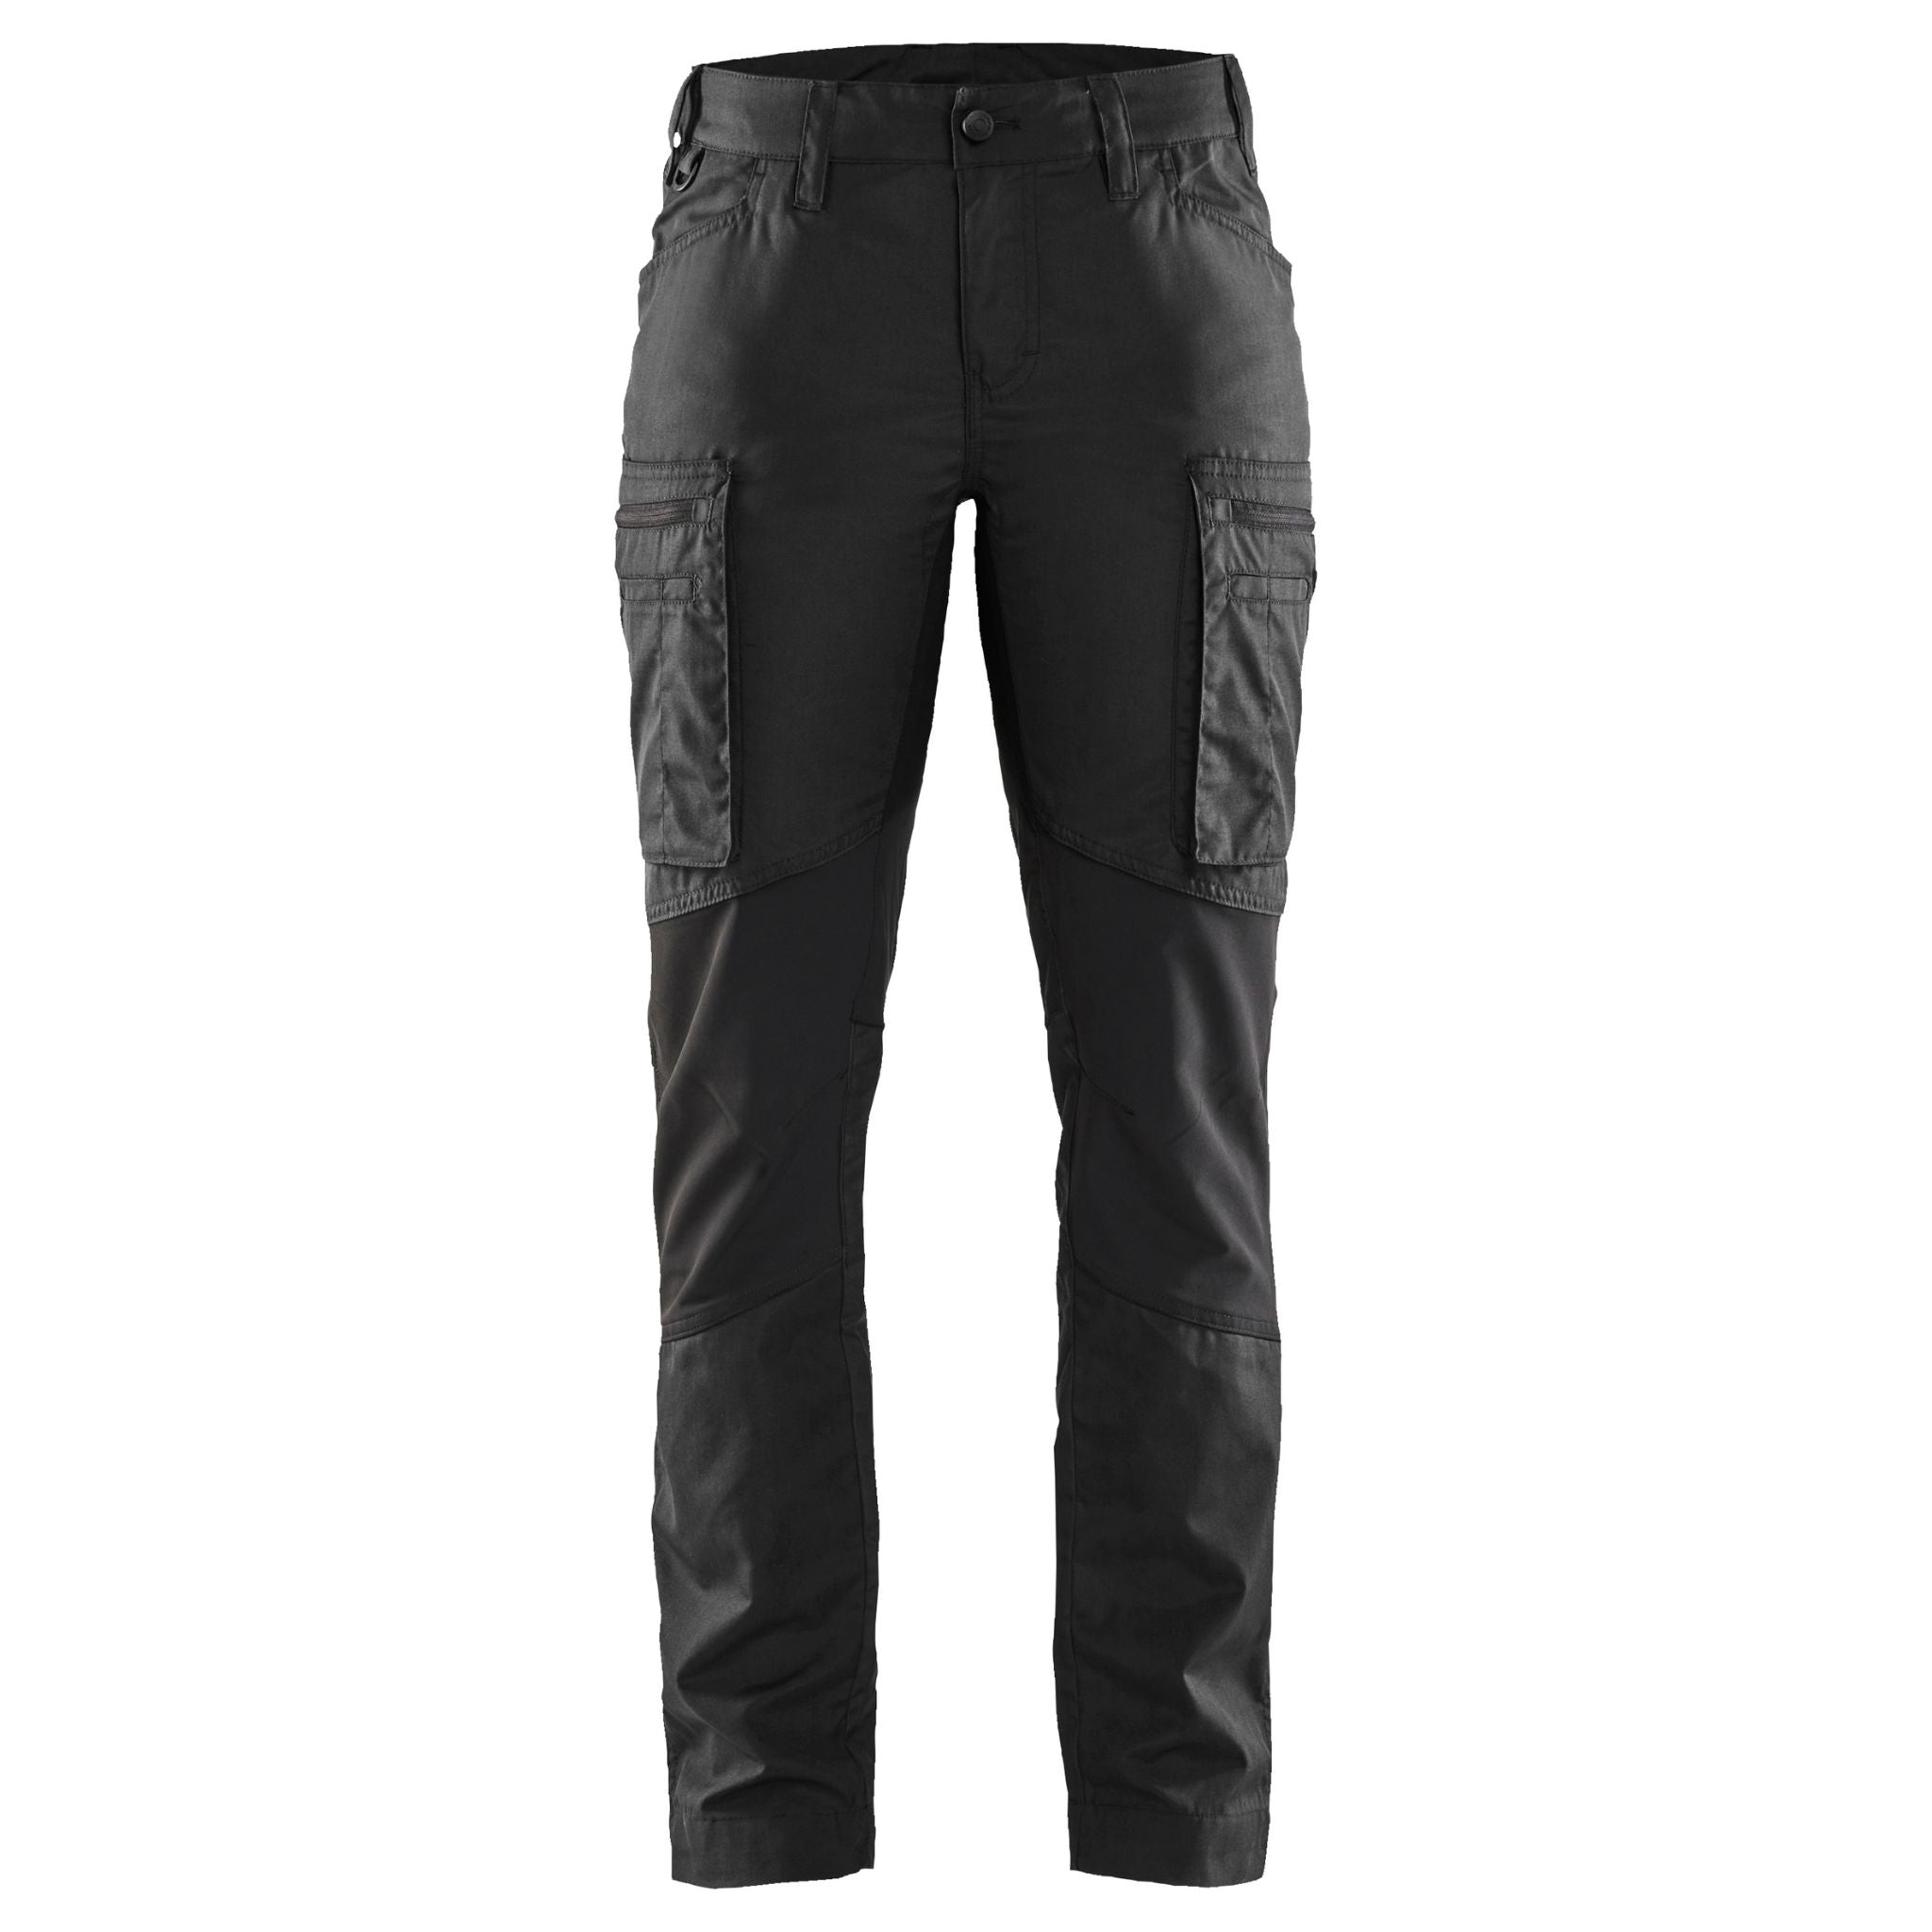 Service Stretch Pants - Stagehands Clothing